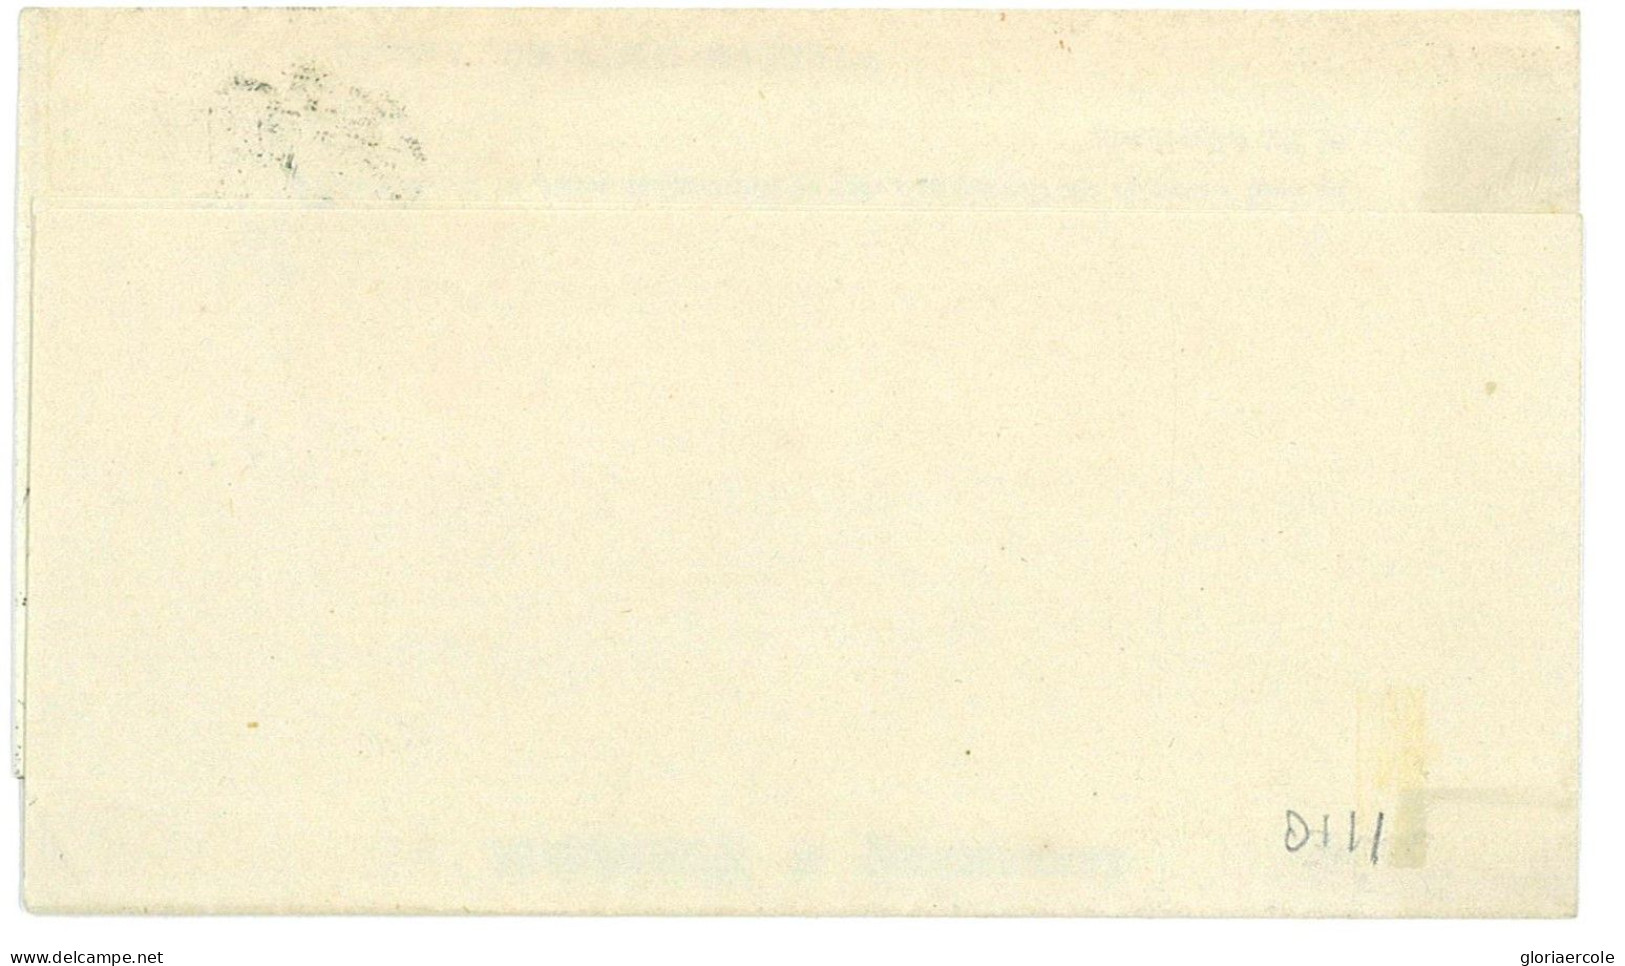 P2897 - USA FRANKLIN 1 CT, ON PRINTED MATTER FOLDED LETTER FROM DEDHAM TO BOSTON SCOTT NR. 9 - Lettres & Documents